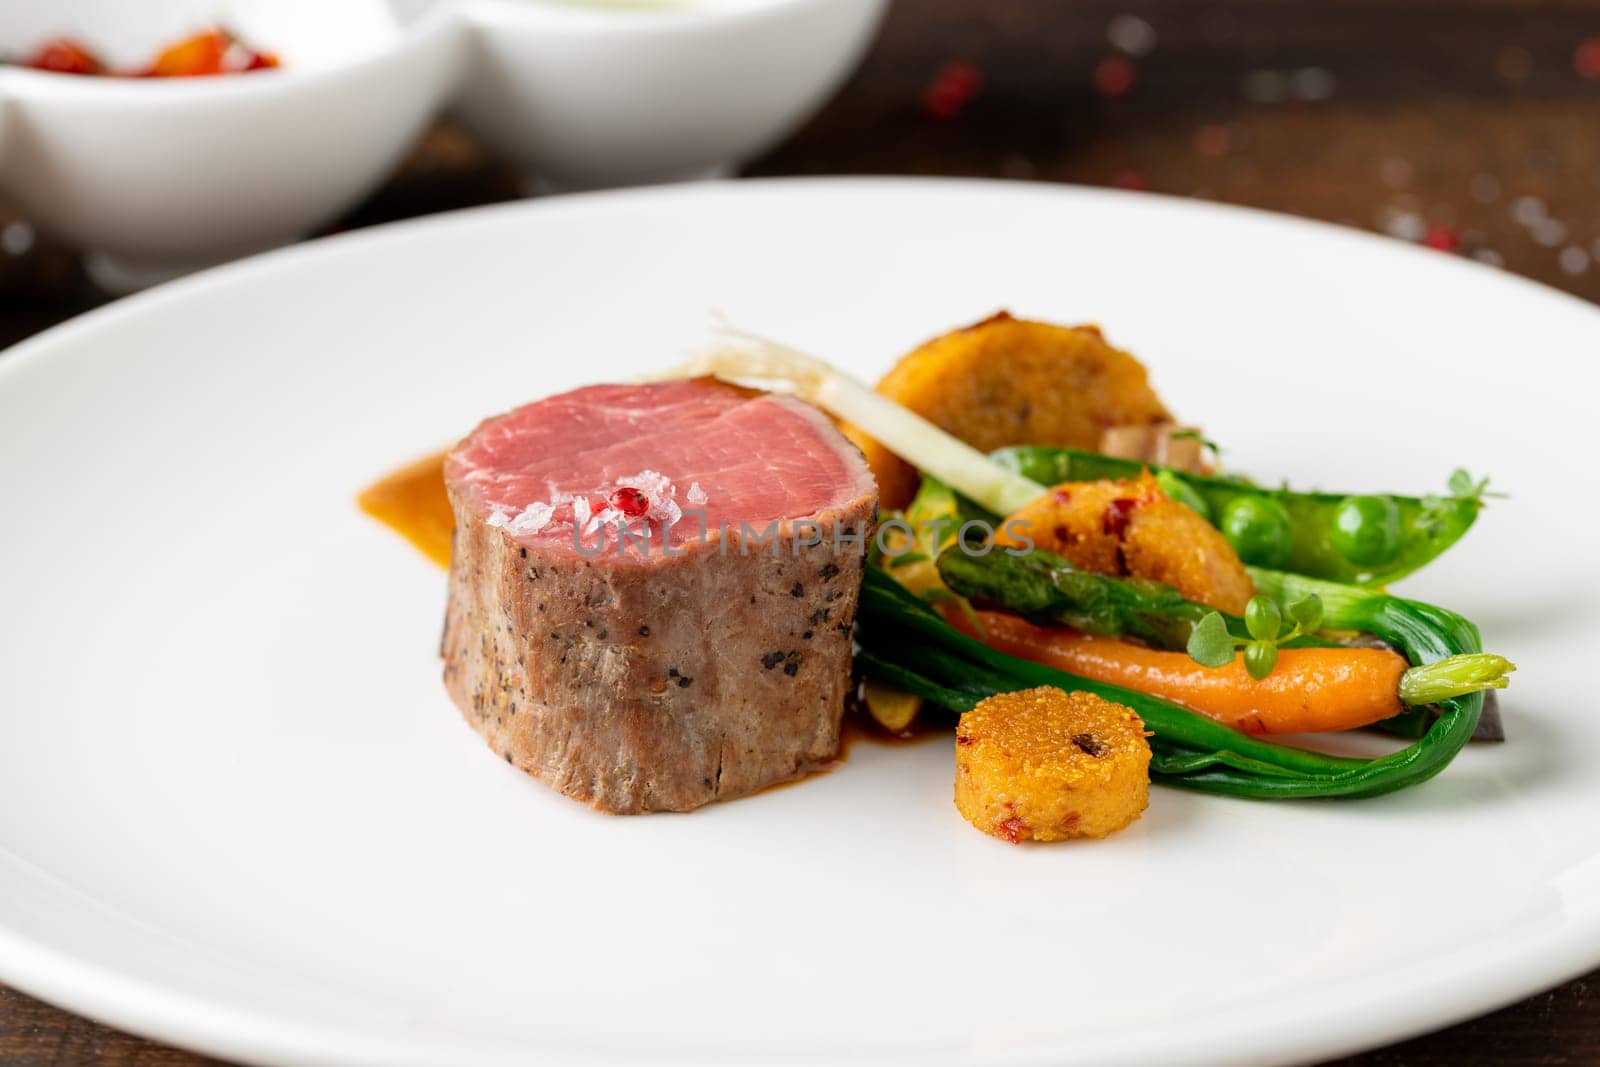 Filet mignon served with vegetables and sauces at a fine dining restaurant by Sonat